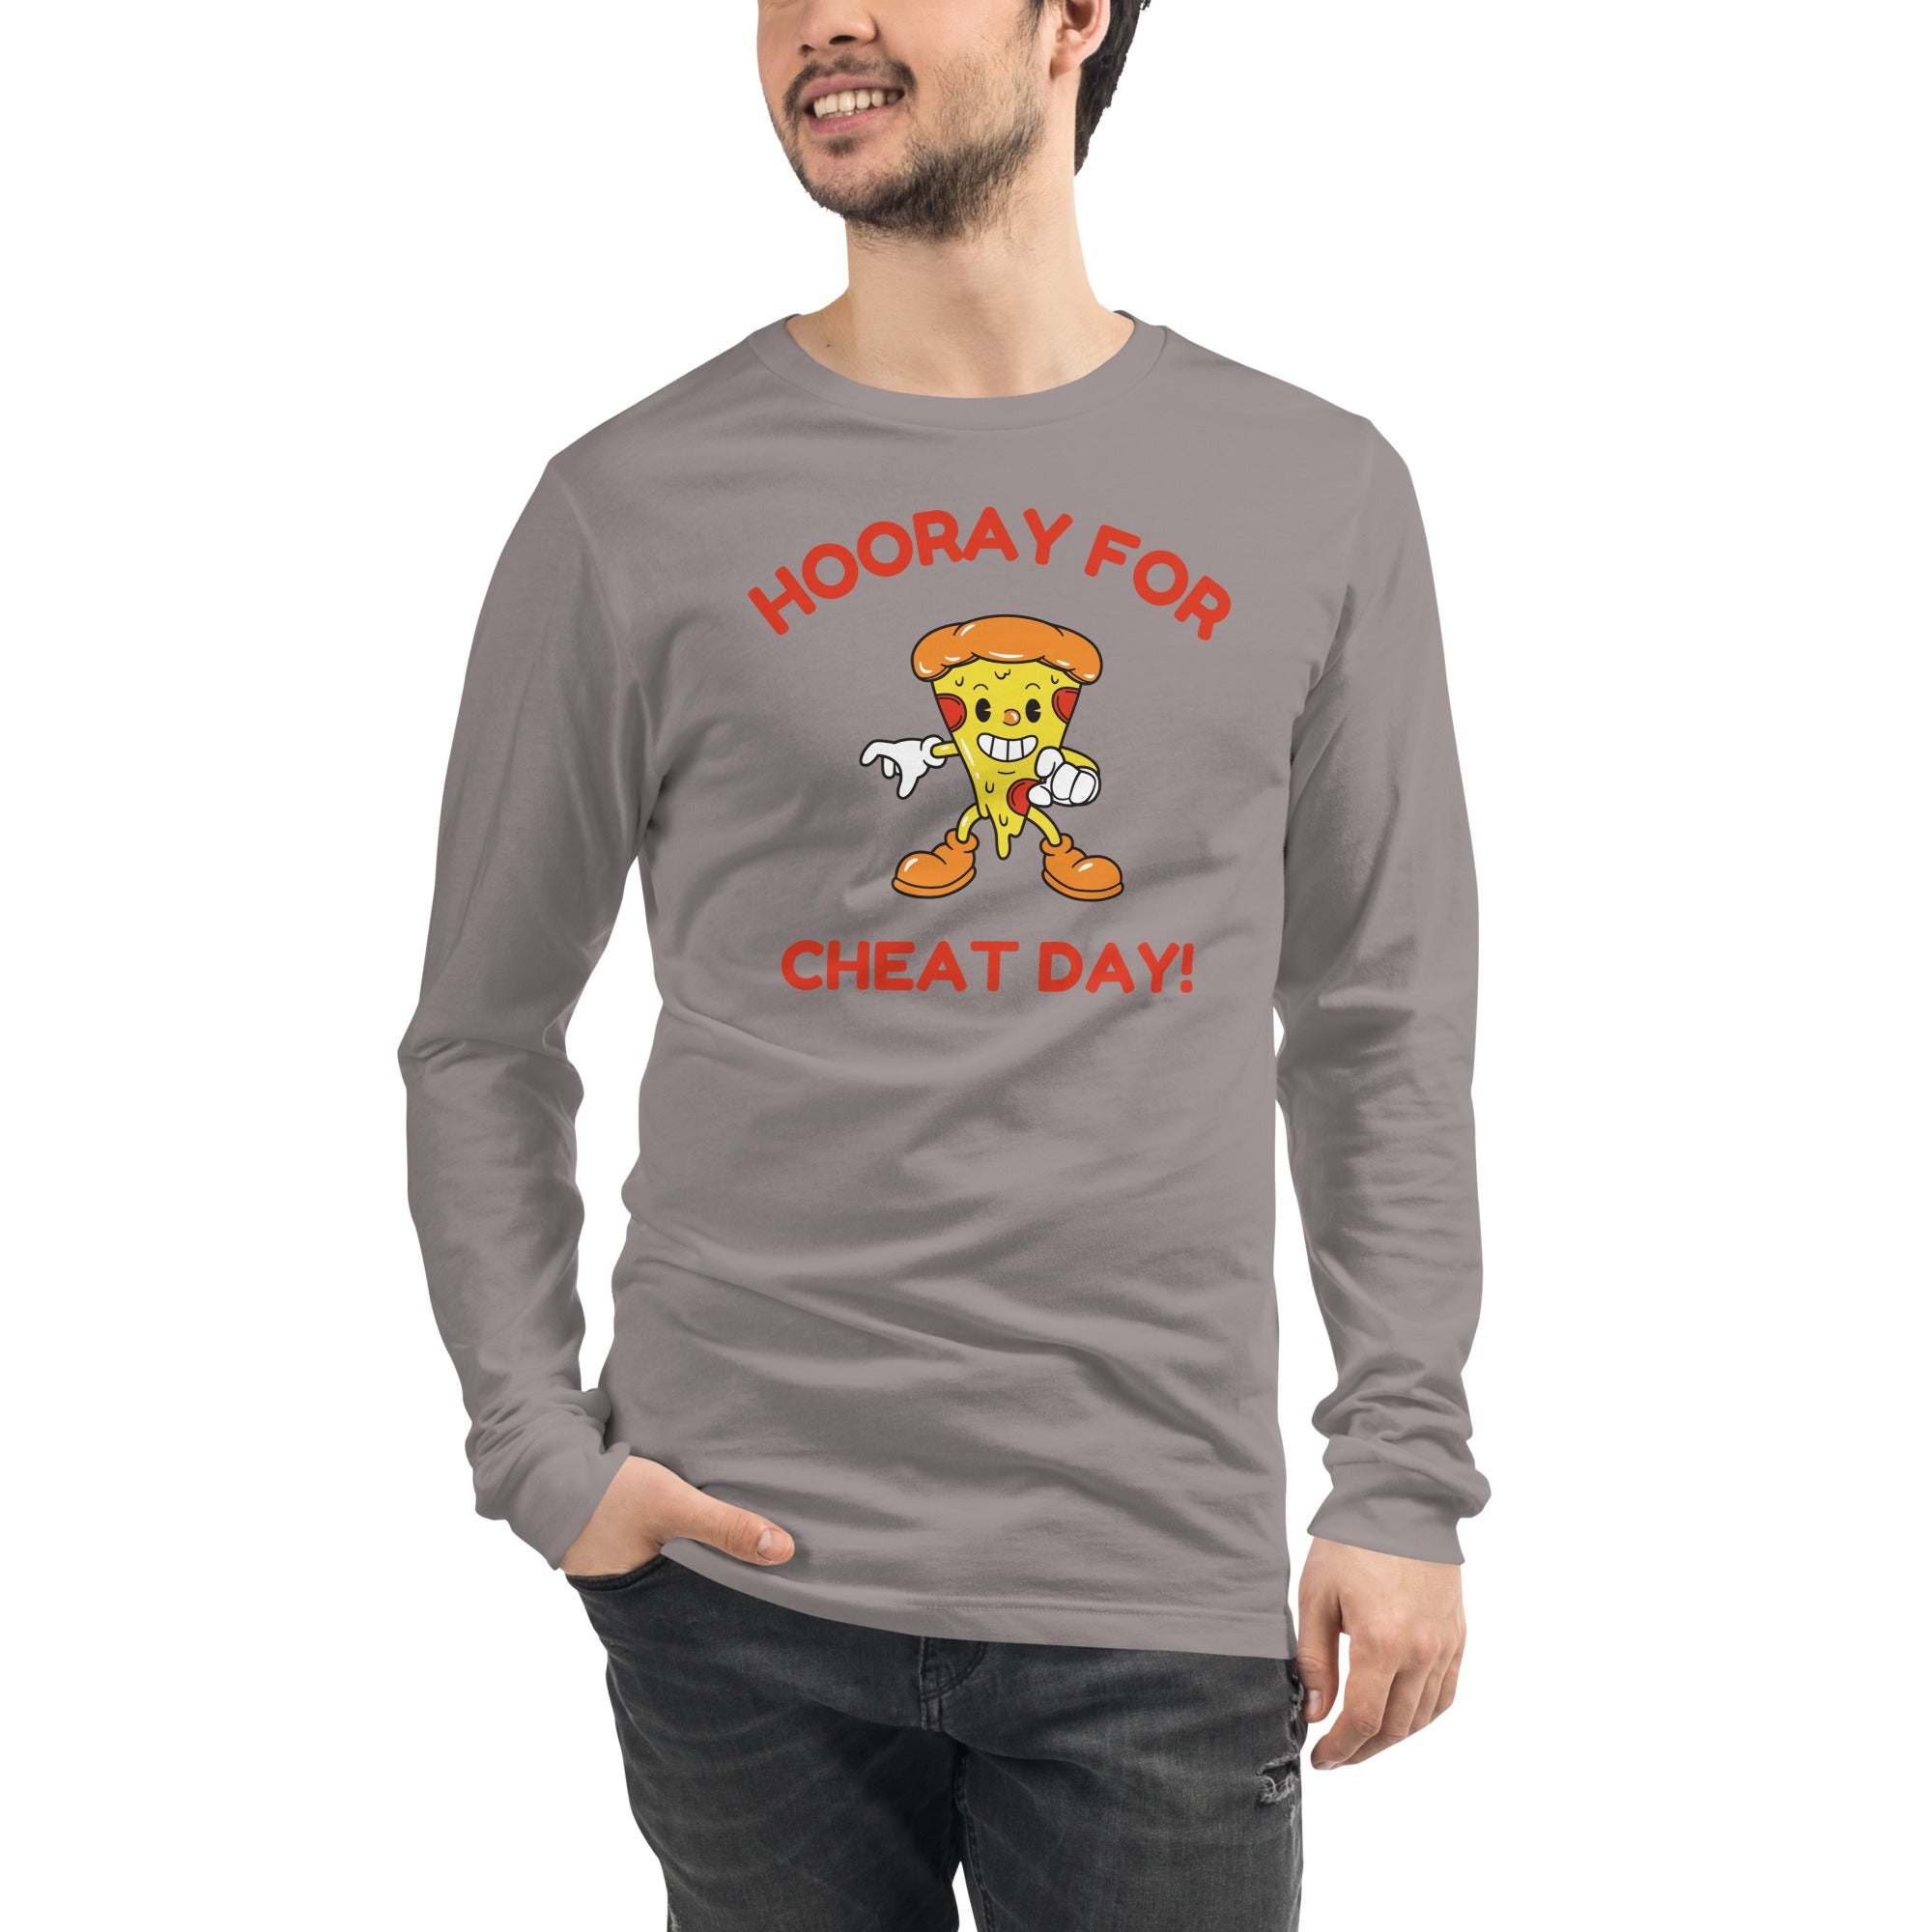 Hooray For Cheat Day! Men's Select Long Sleeve